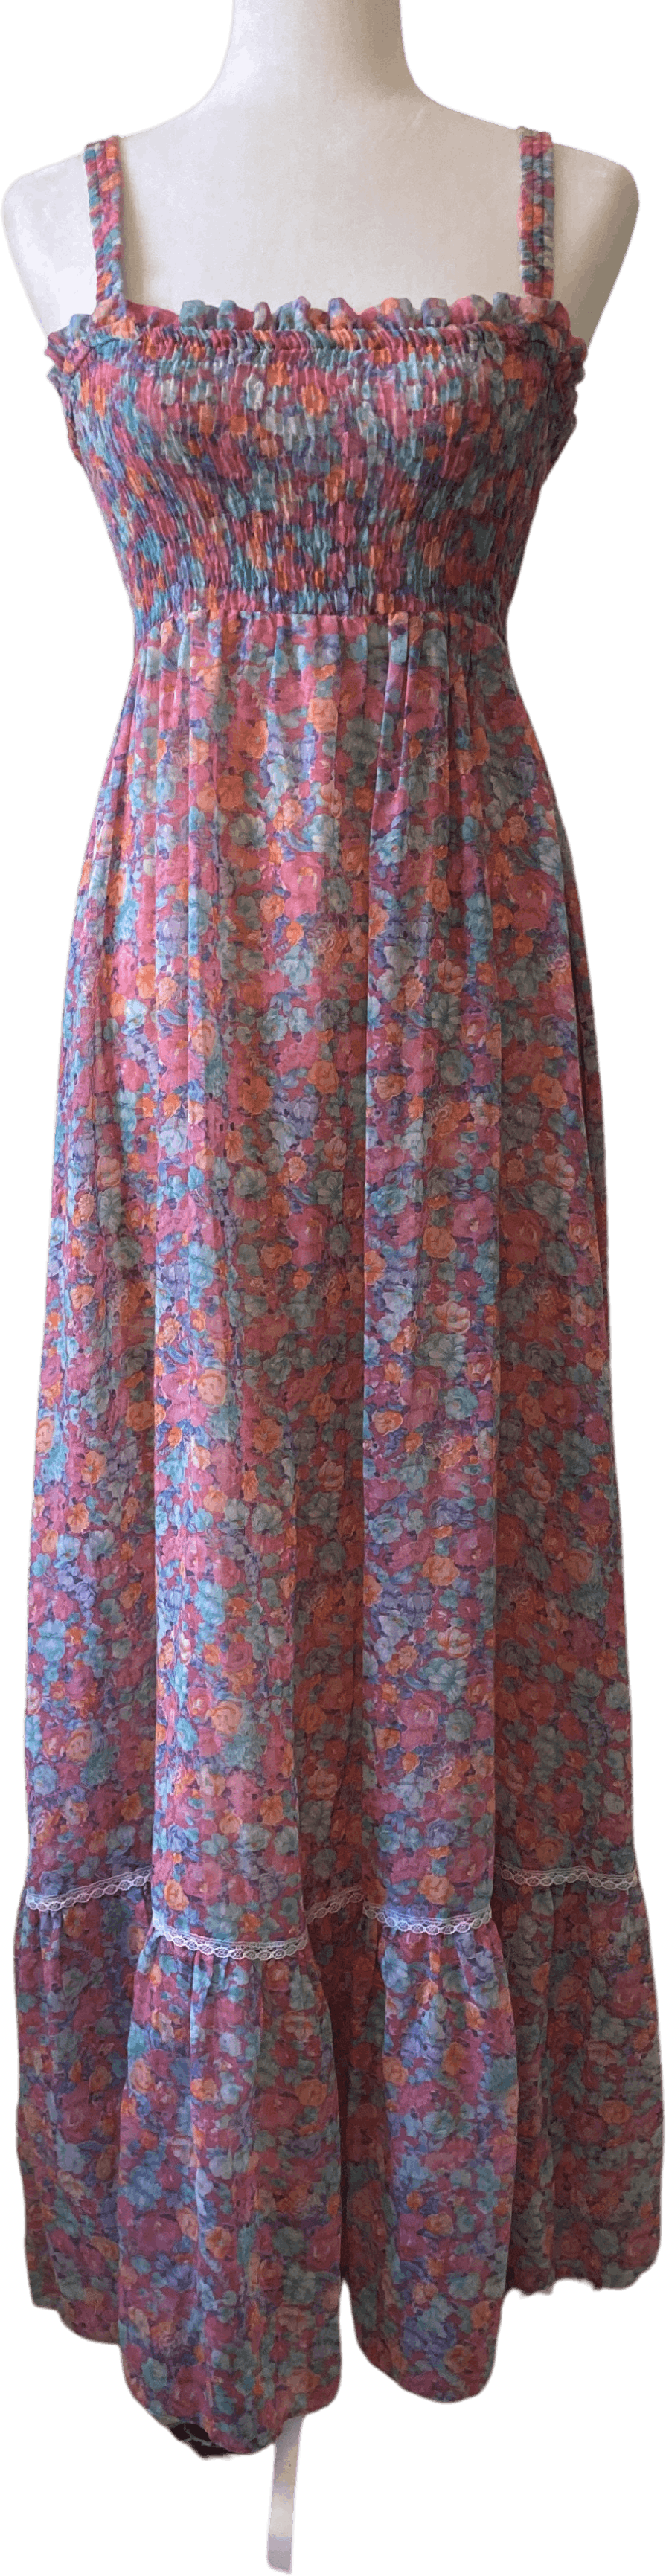 Vintage 70's Pink Floral Maxi Sundress with Elastic Bust by Candi Jones ...